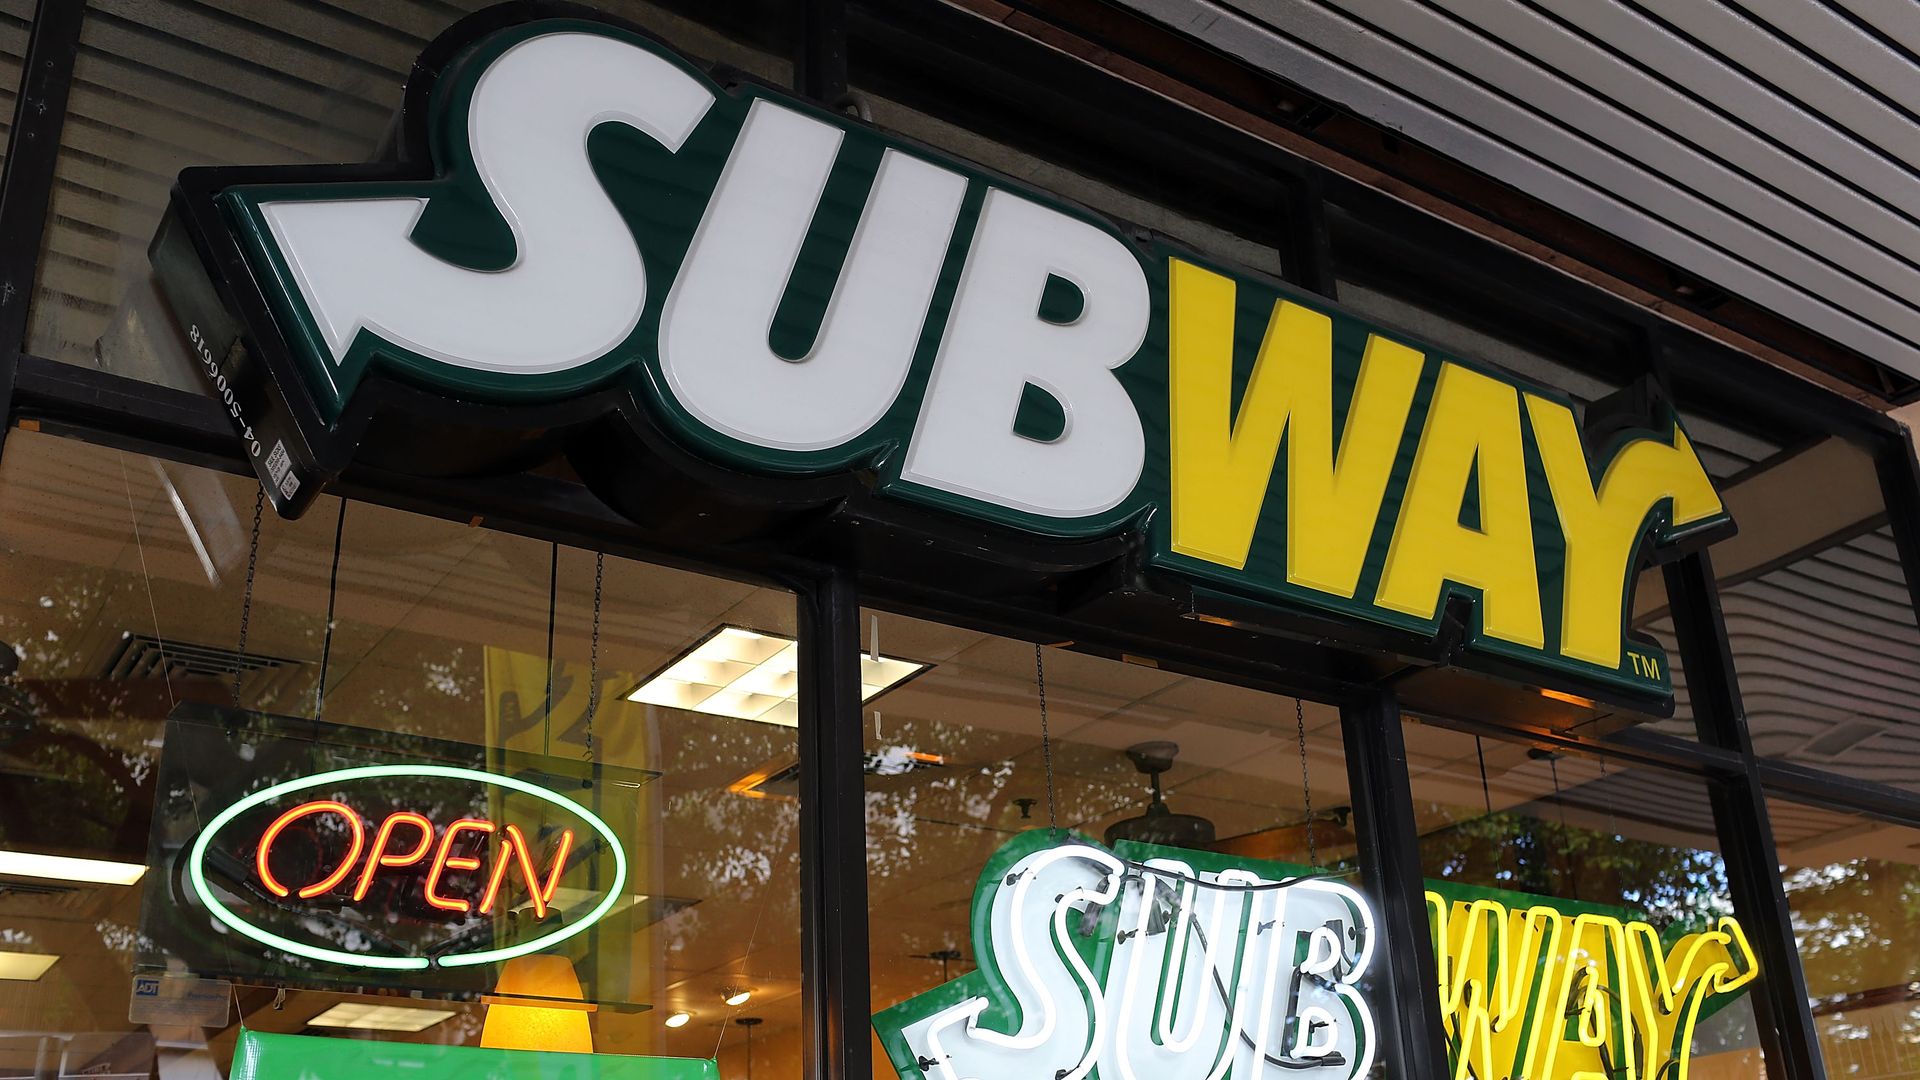 Subway restaurant storefront with signs saying Subway and an open sign